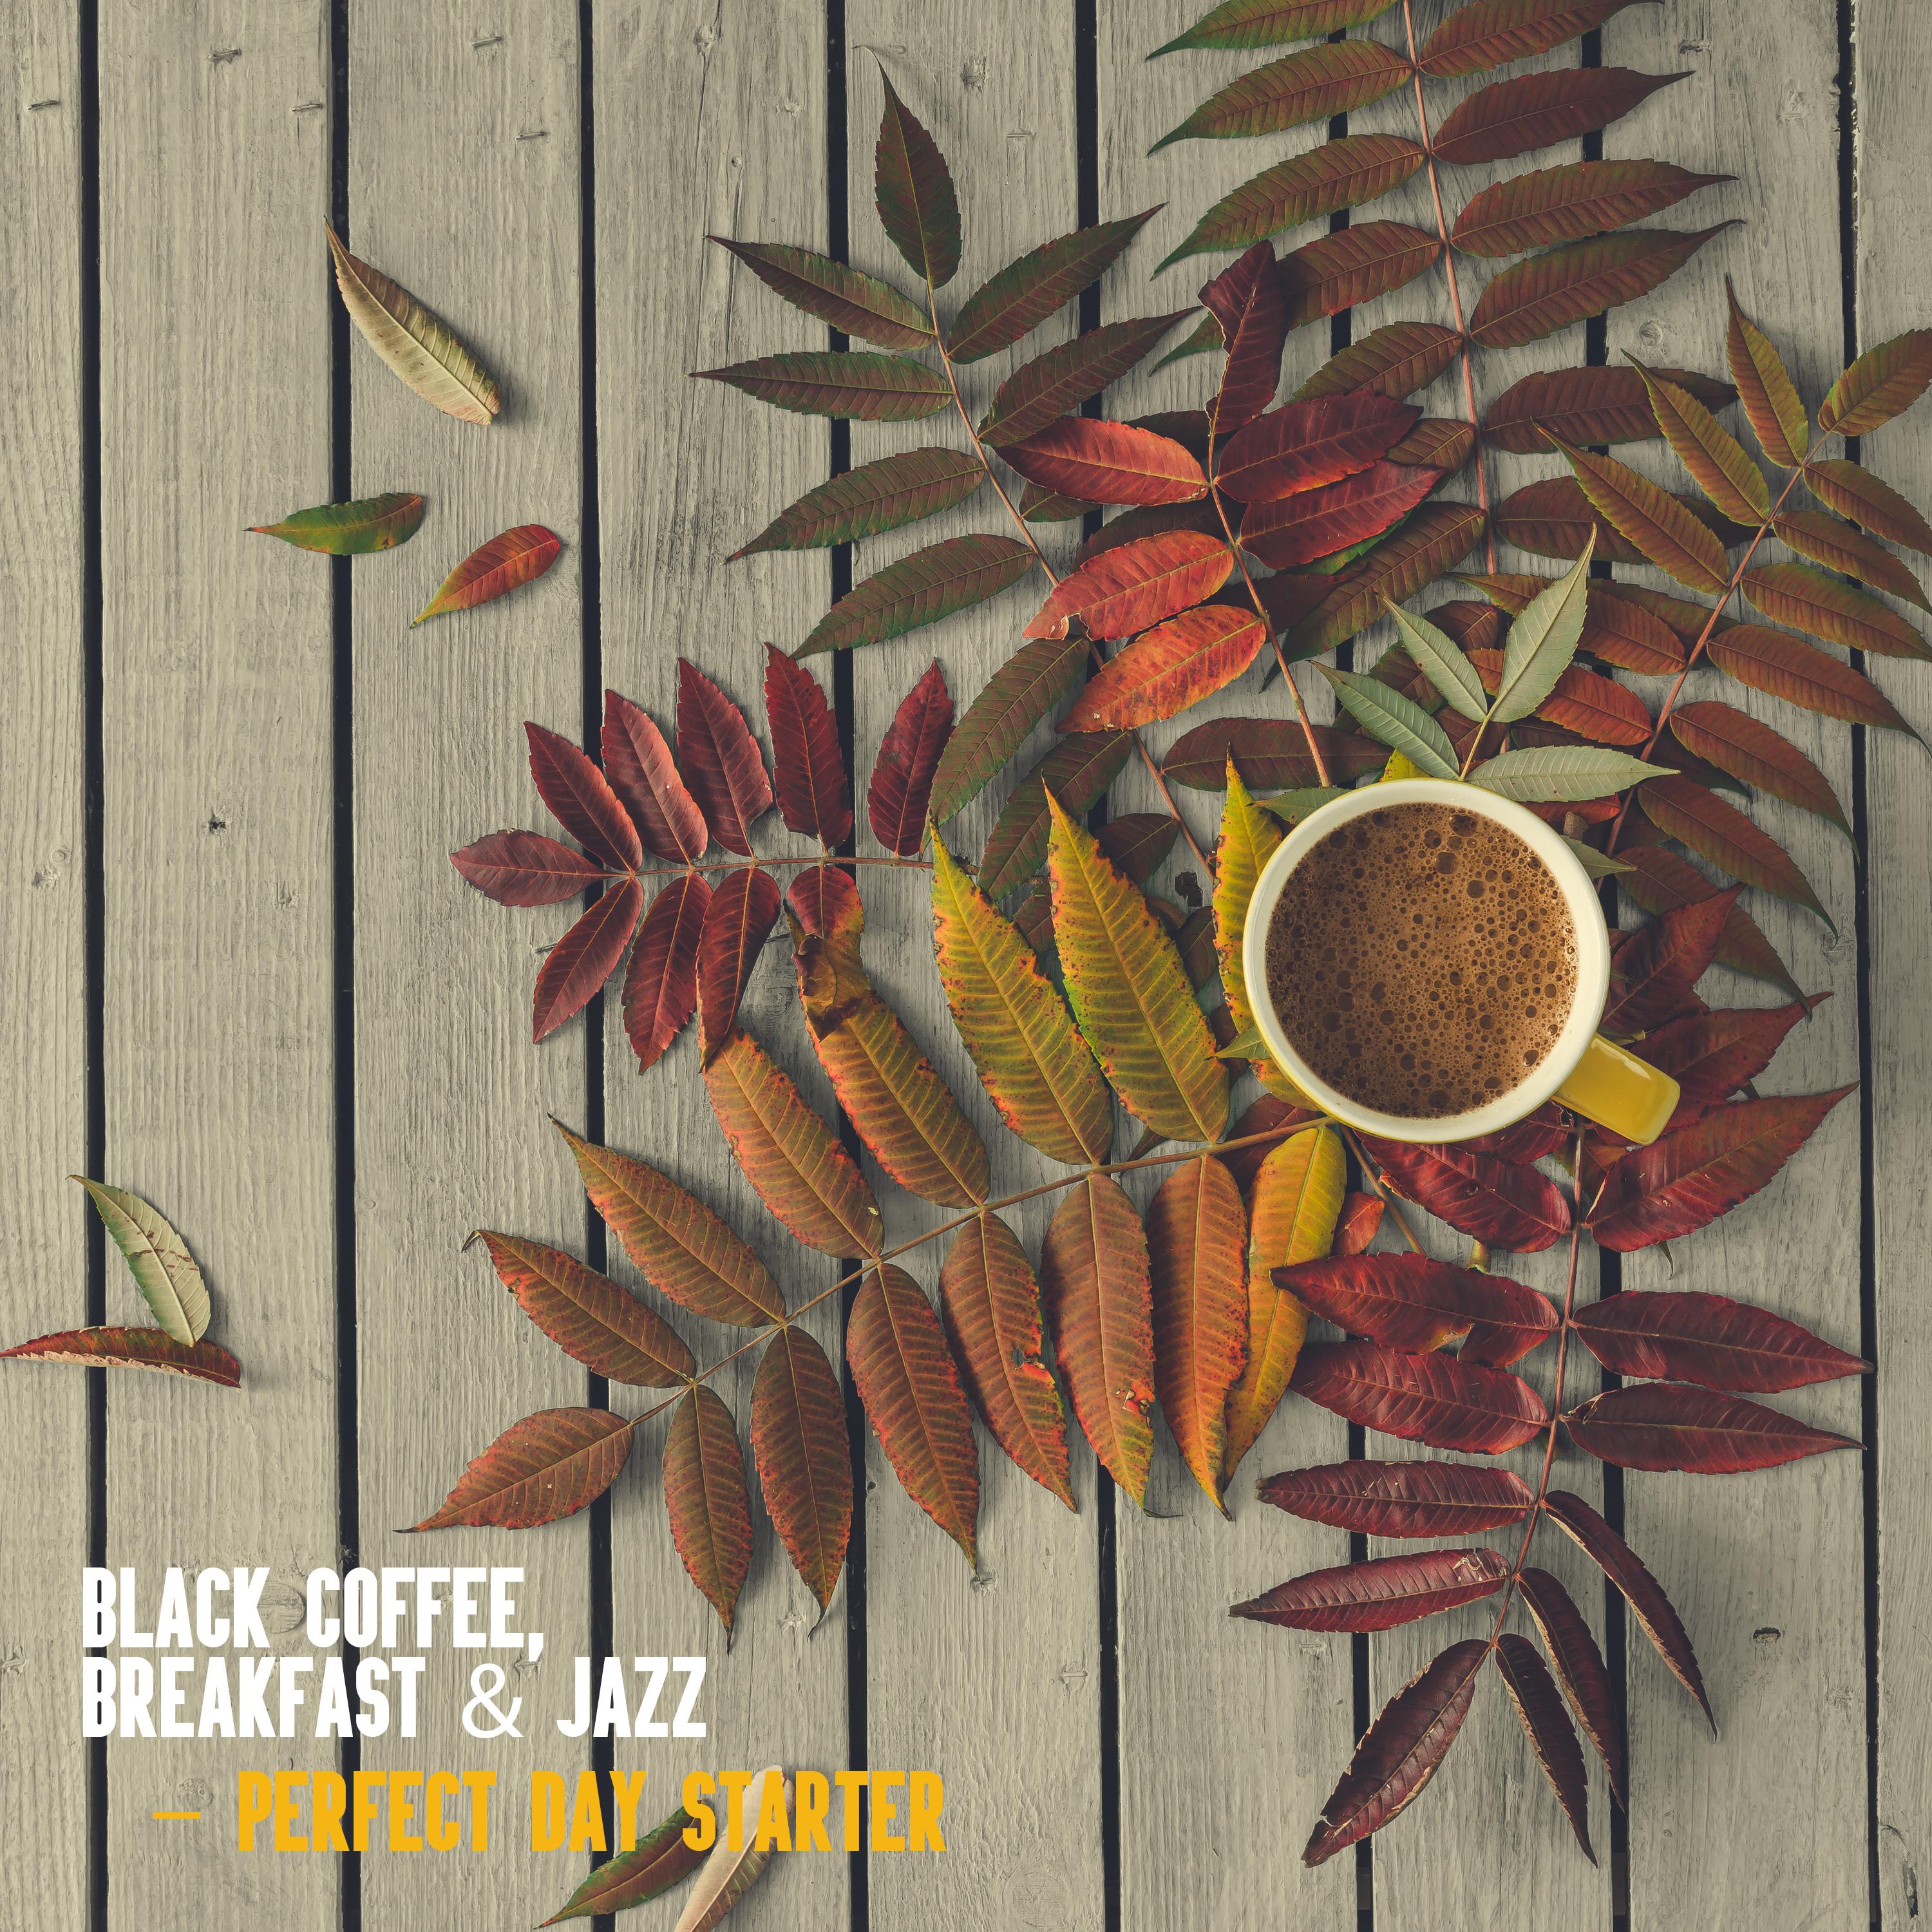 Black Coffee, Breakfast  Jazz  Perfect Day Starter: 2019 Compilation of Best Smooth Instrumental Jazz Music for Perfect Start a Day, Increase the Level of Endorphins, Be Happy  Full of Energy